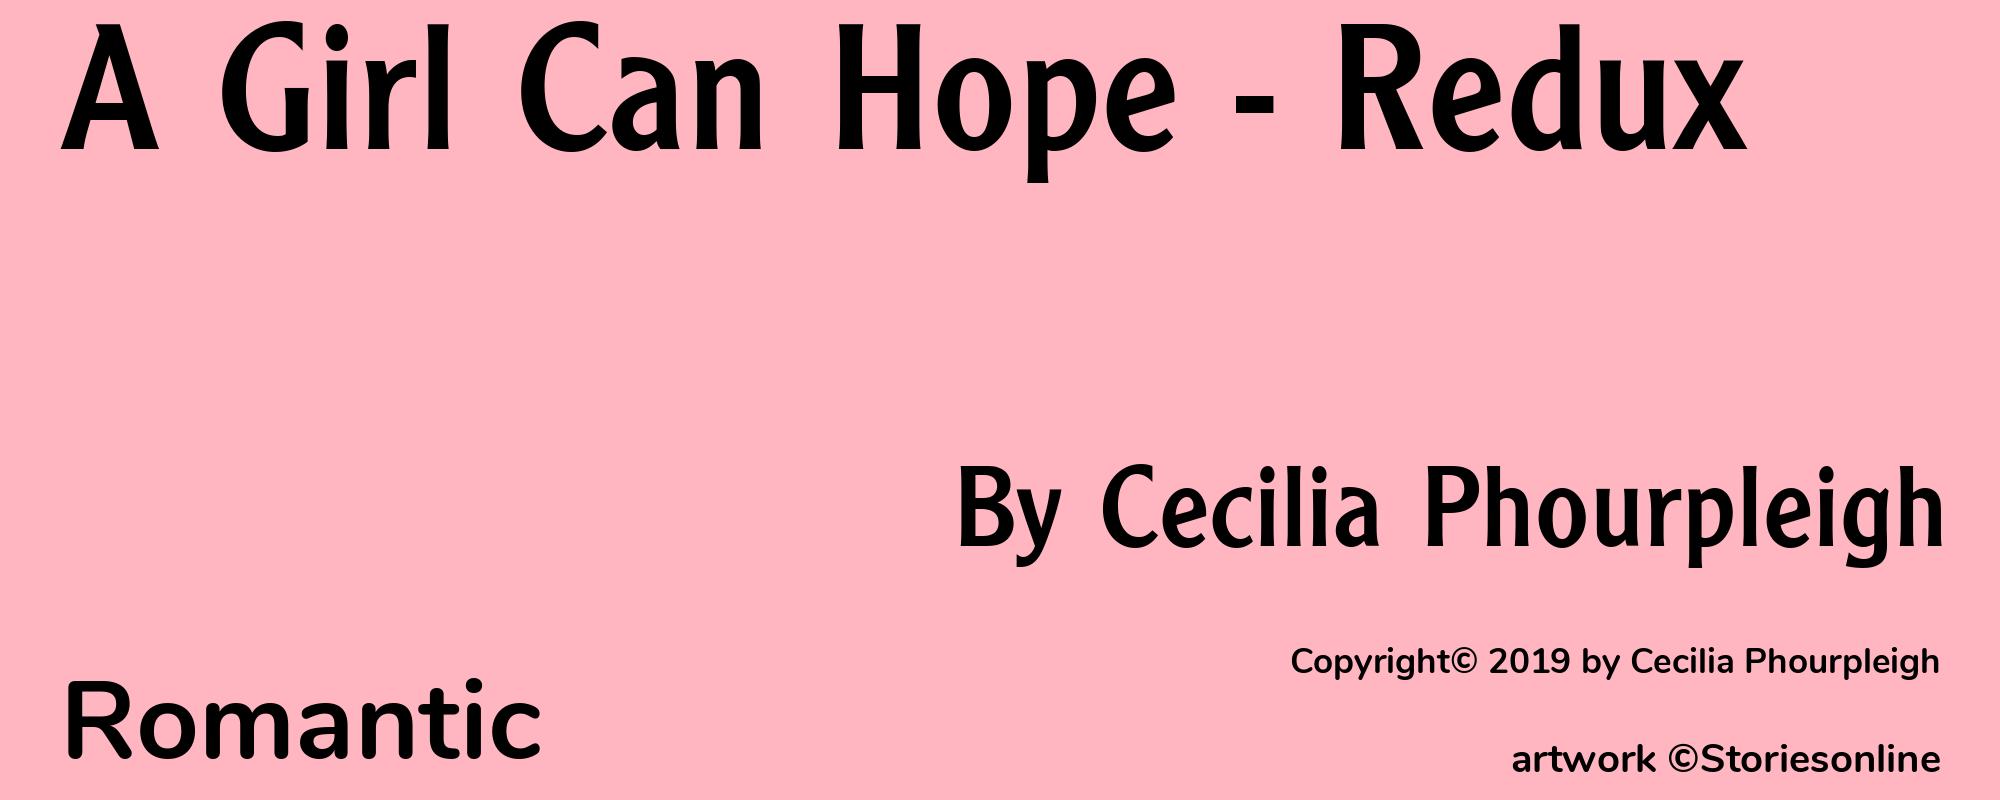 A Girl Can Hope - Redux - Cover